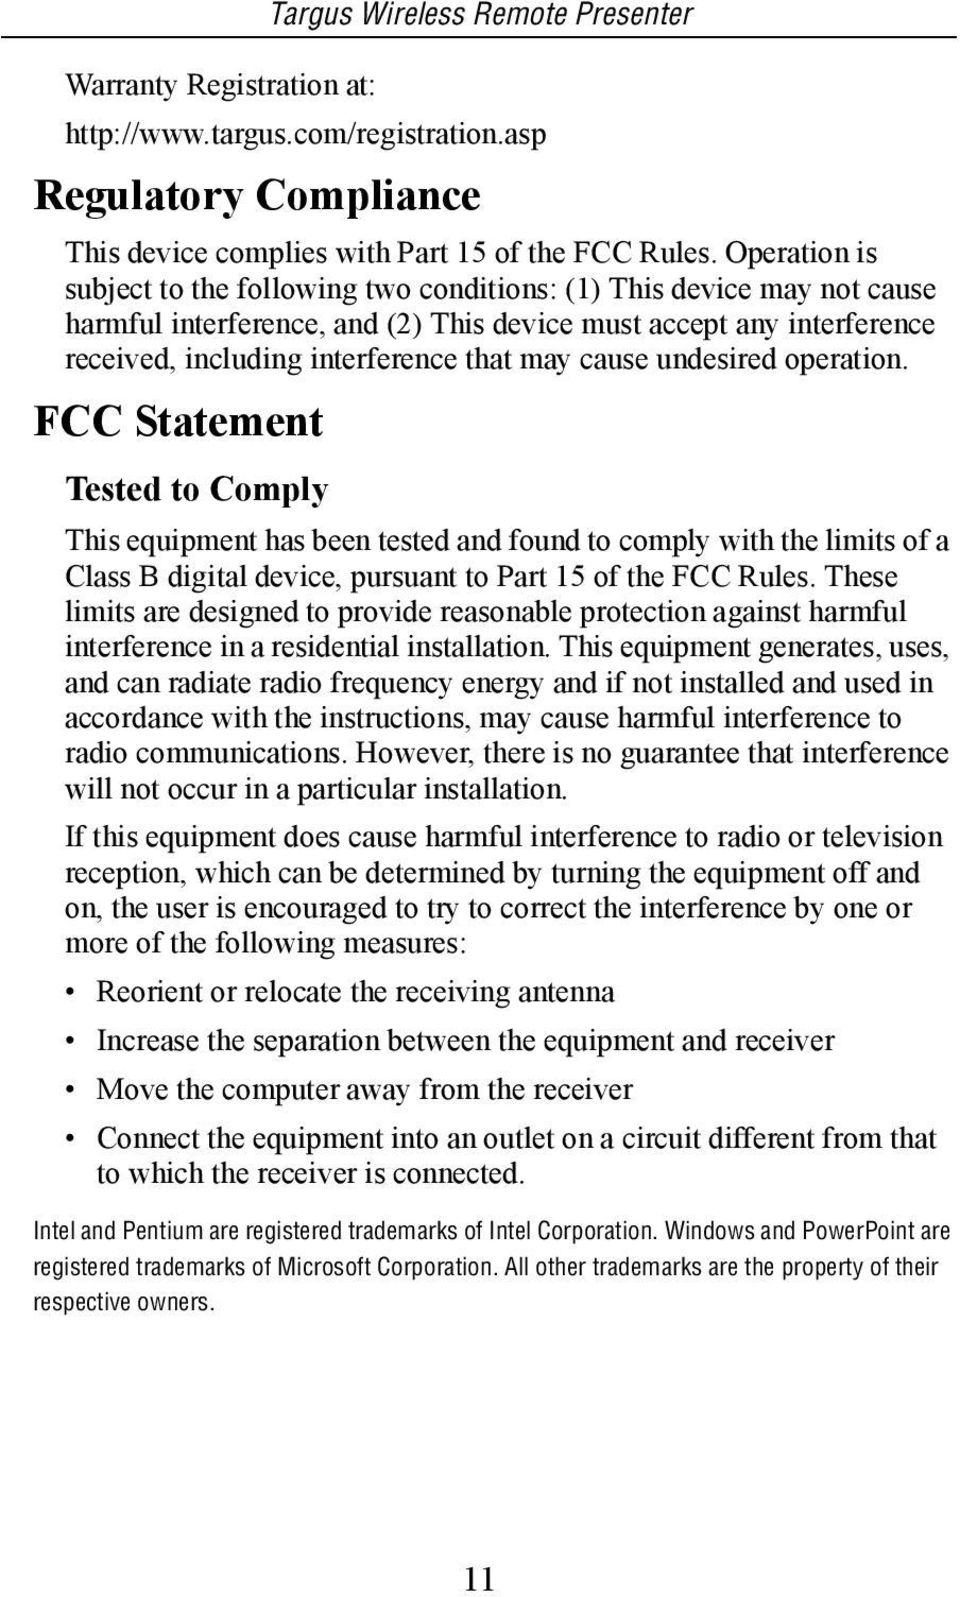 cause undesired operation. FCC Statement Tested to Comply This equipment has been tested and found to comply with the limits of a Class B digital device, pursuant to Part 15 of the FCC Rules.